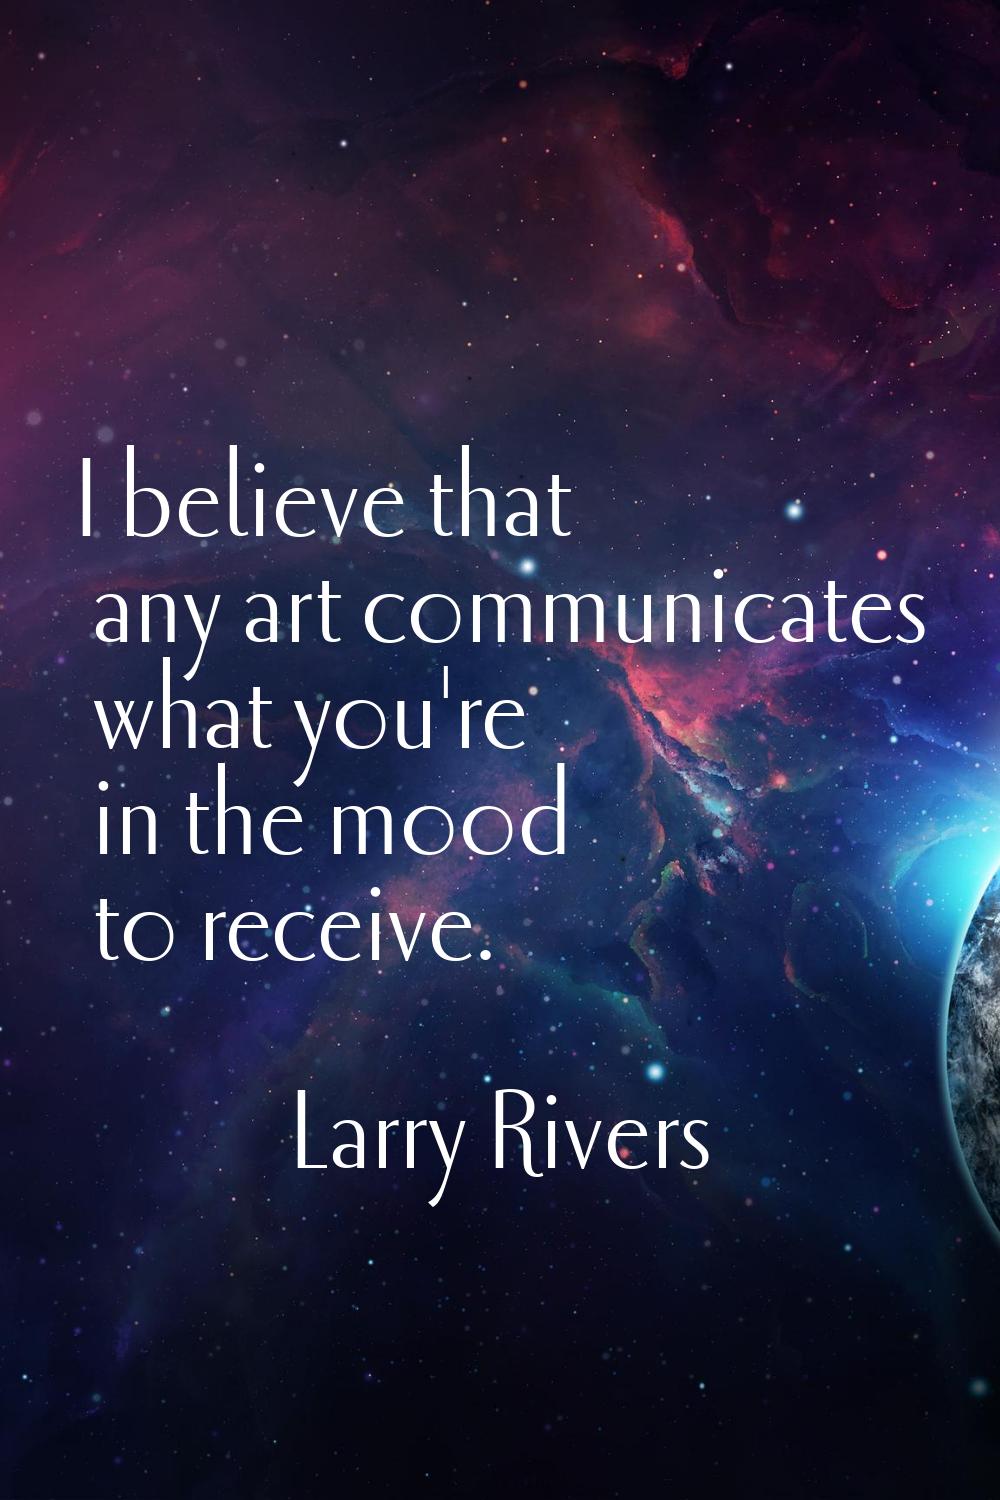 I believe that any art communicates what you're in the mood to receive.